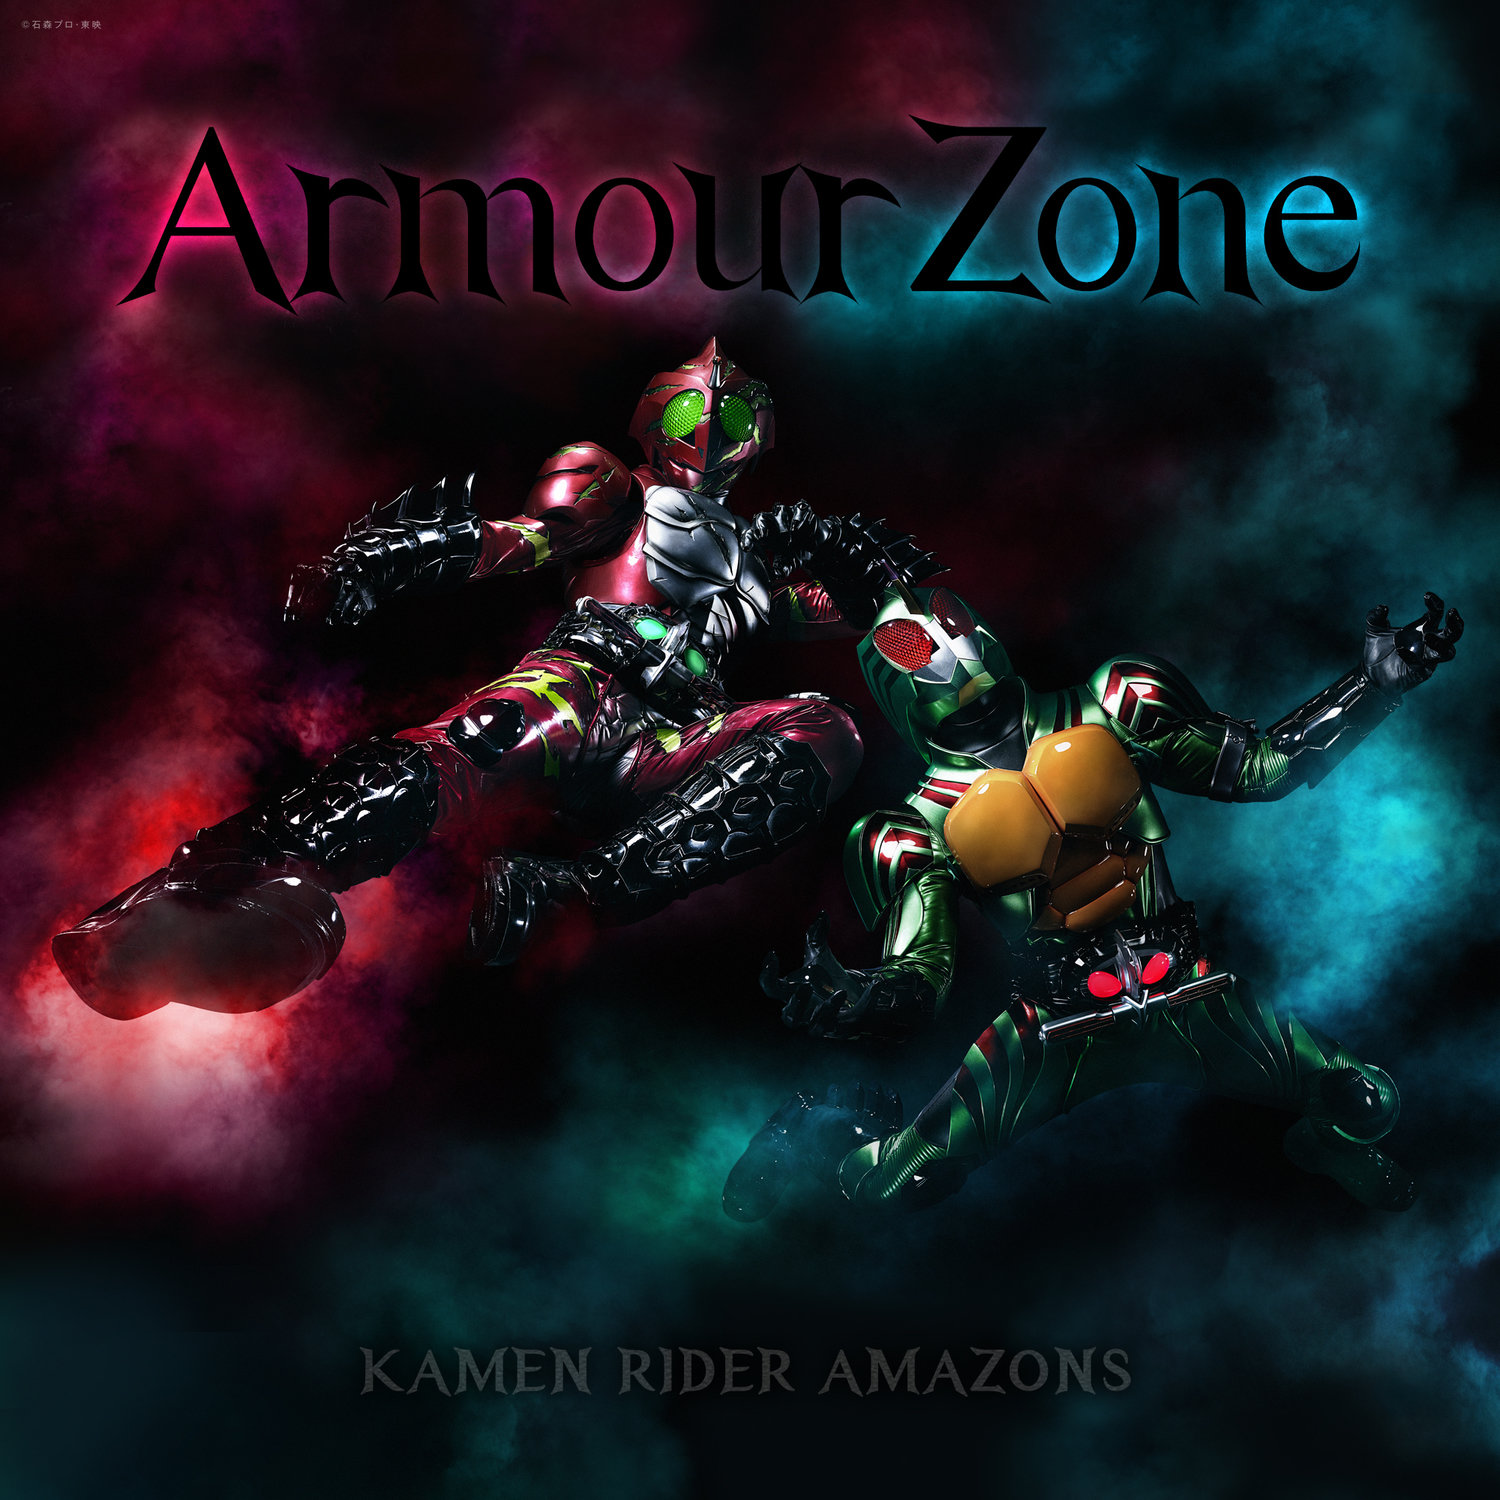 https://static.wikia.nocookie.net/kamenrider/images/1/15/Armour_Zone_CD_Cover.jpg/revision/latest?cb=20160416153243